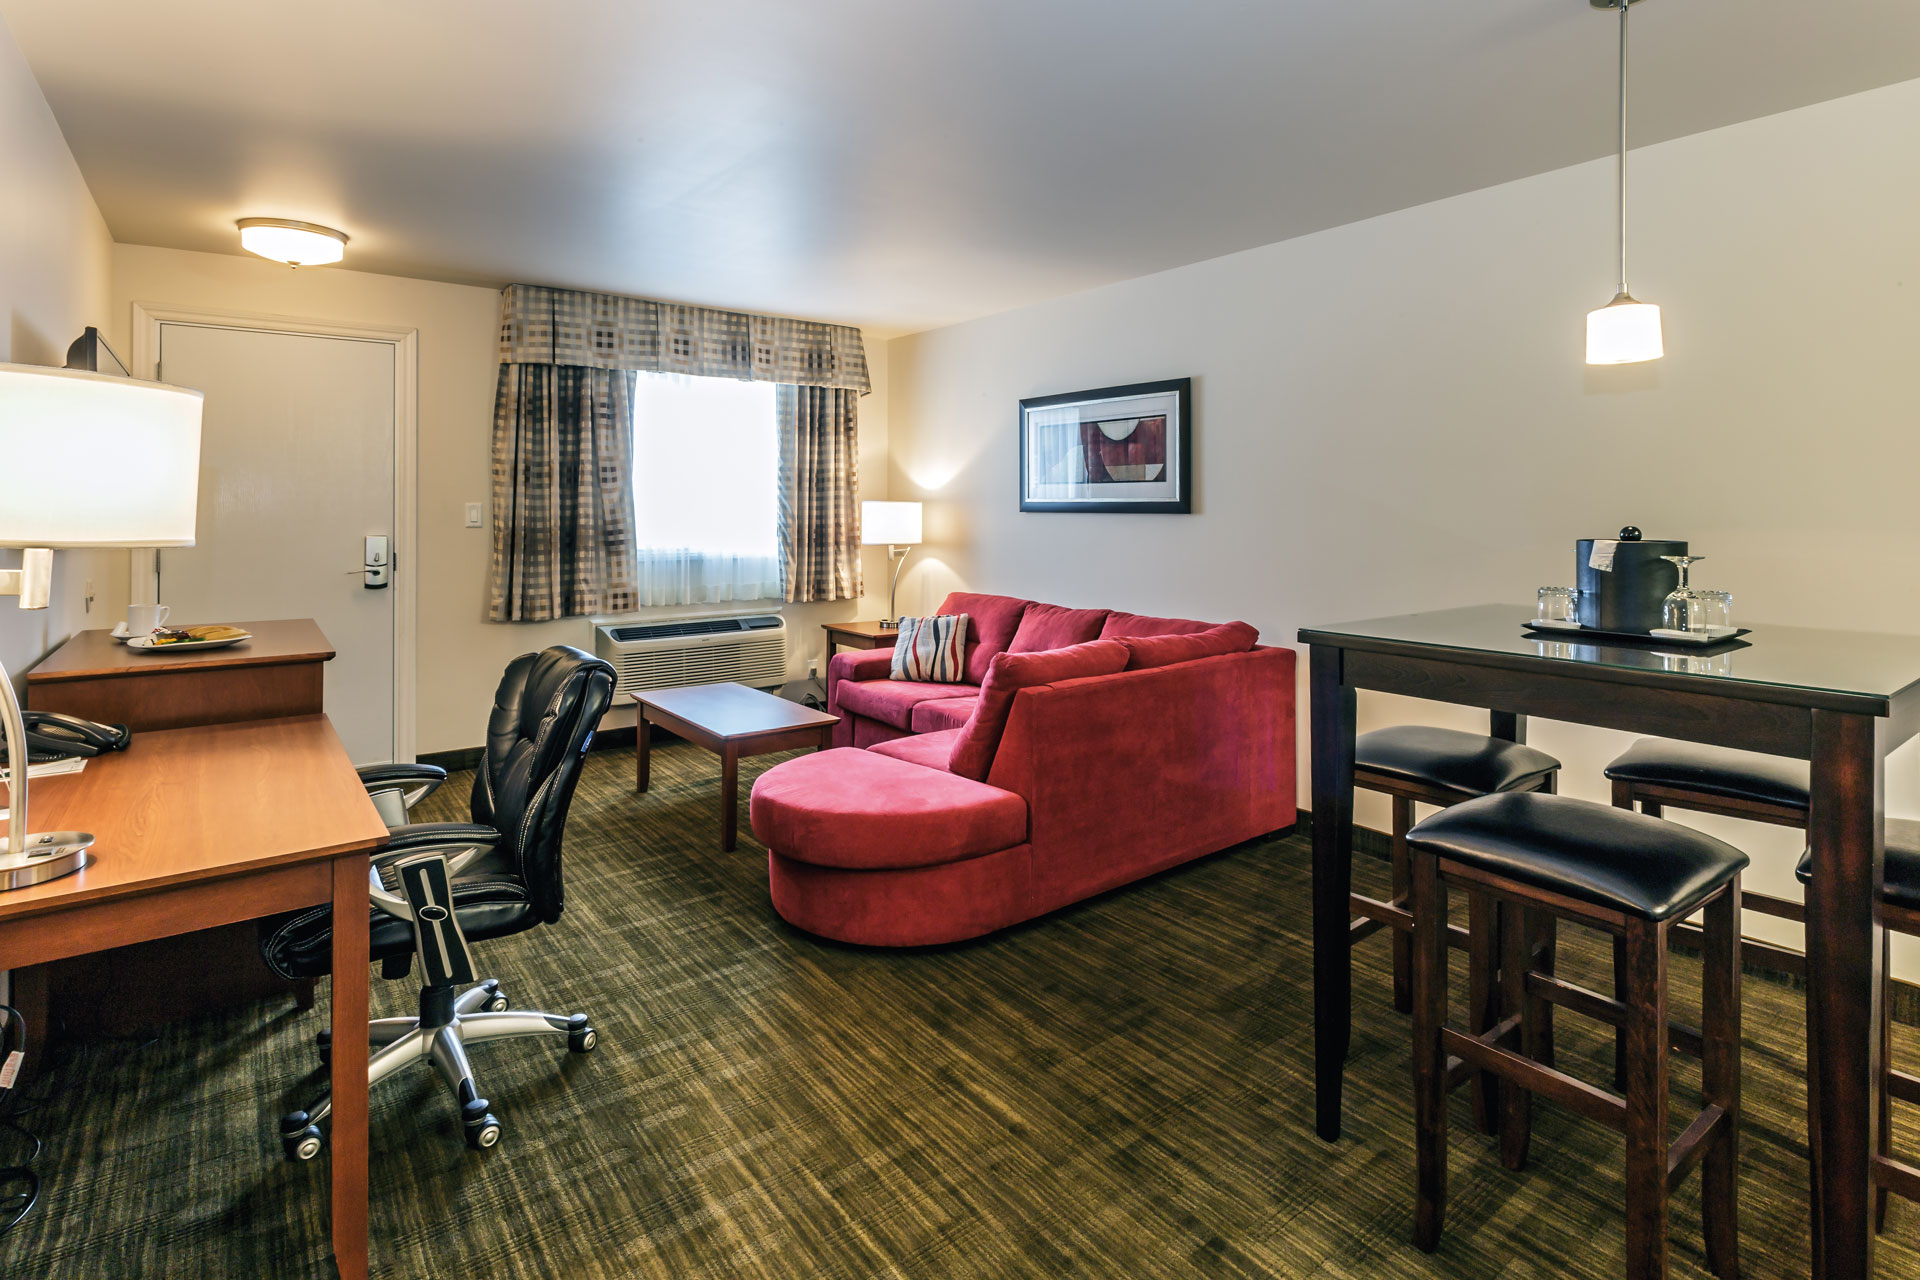 Our extended stay suites offer the perfect place for a long business trip.